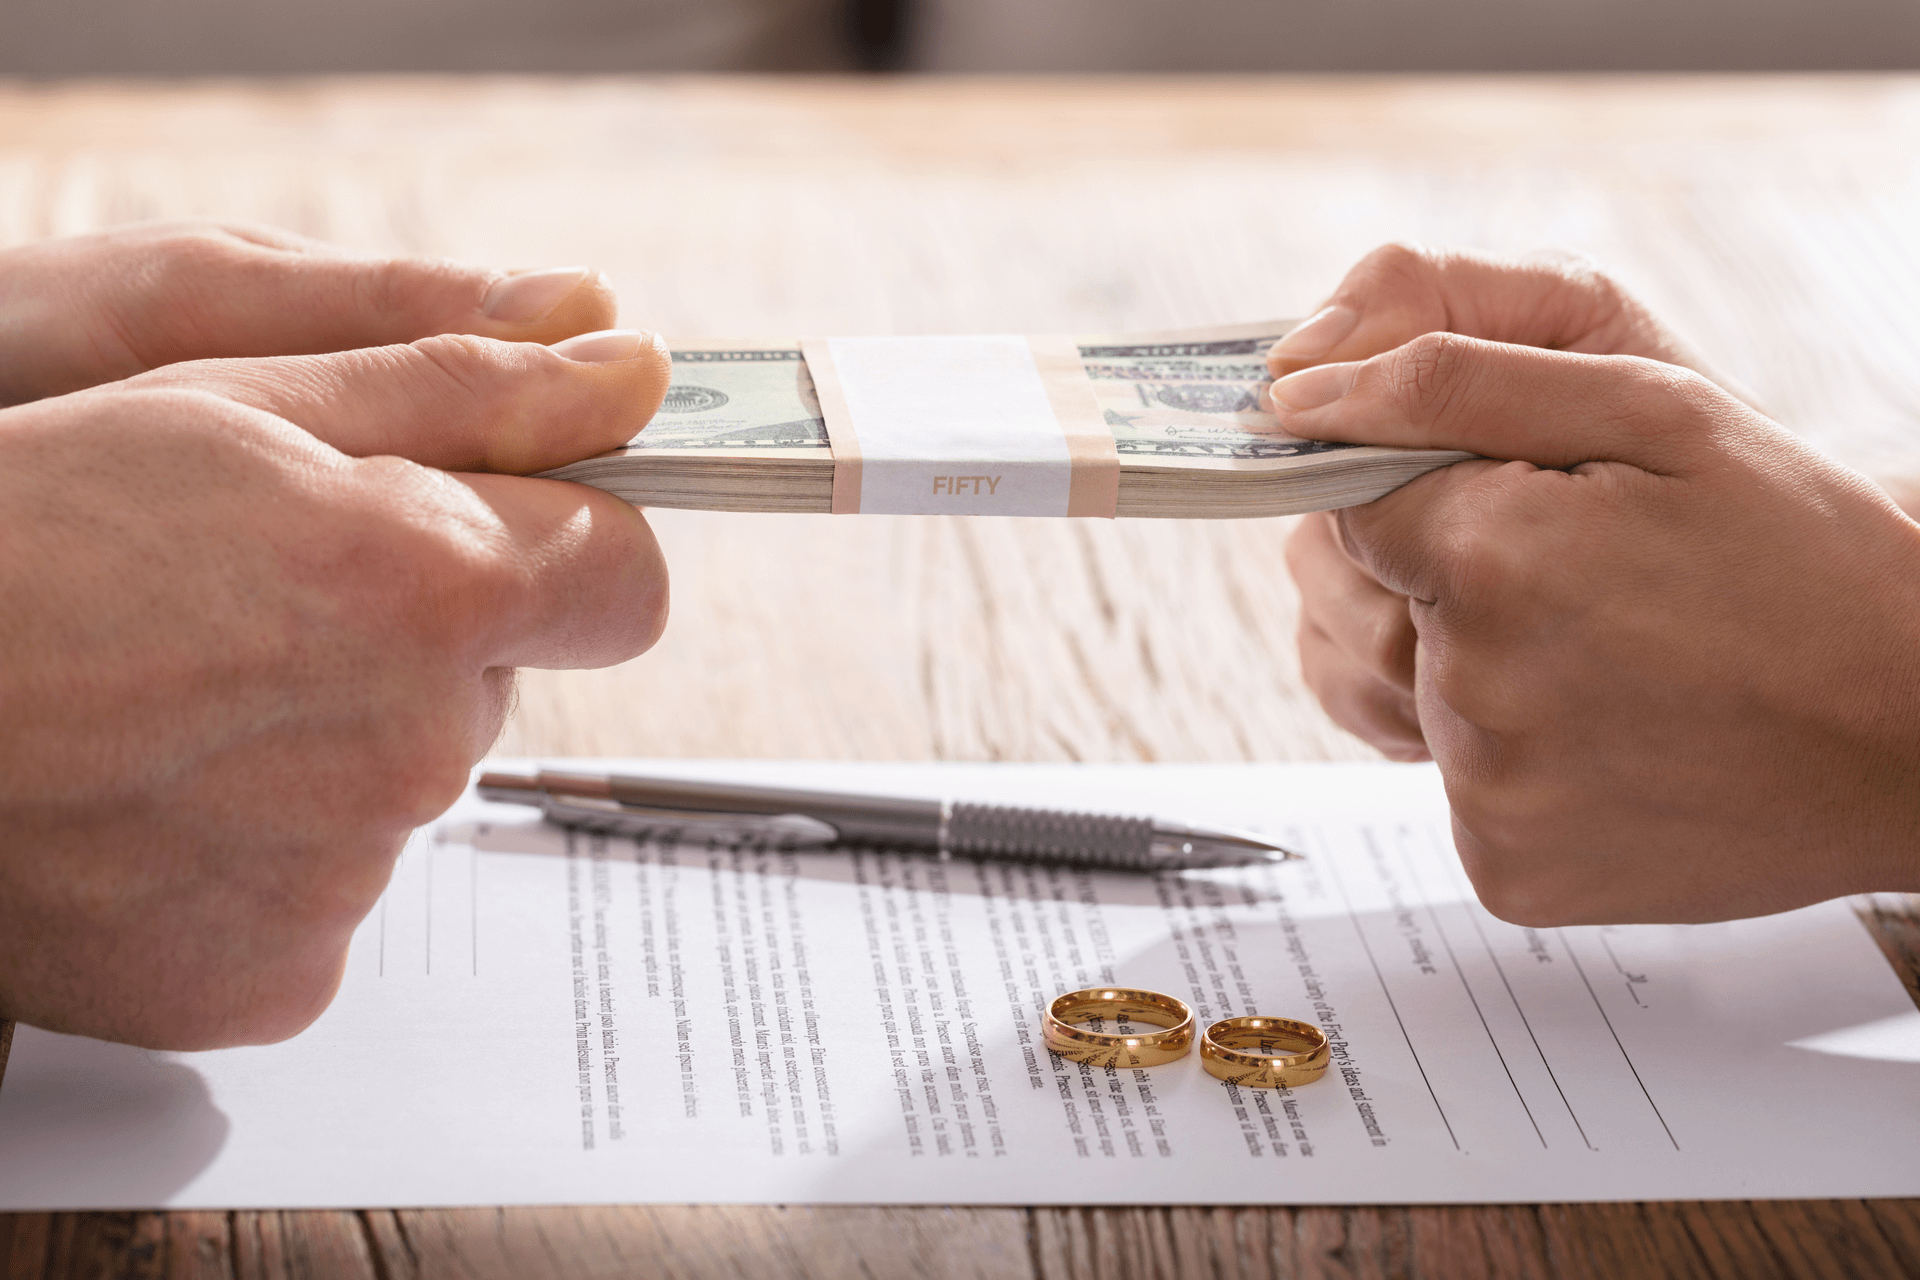 Divorce Causes Fights Over Money In More Ways Than One